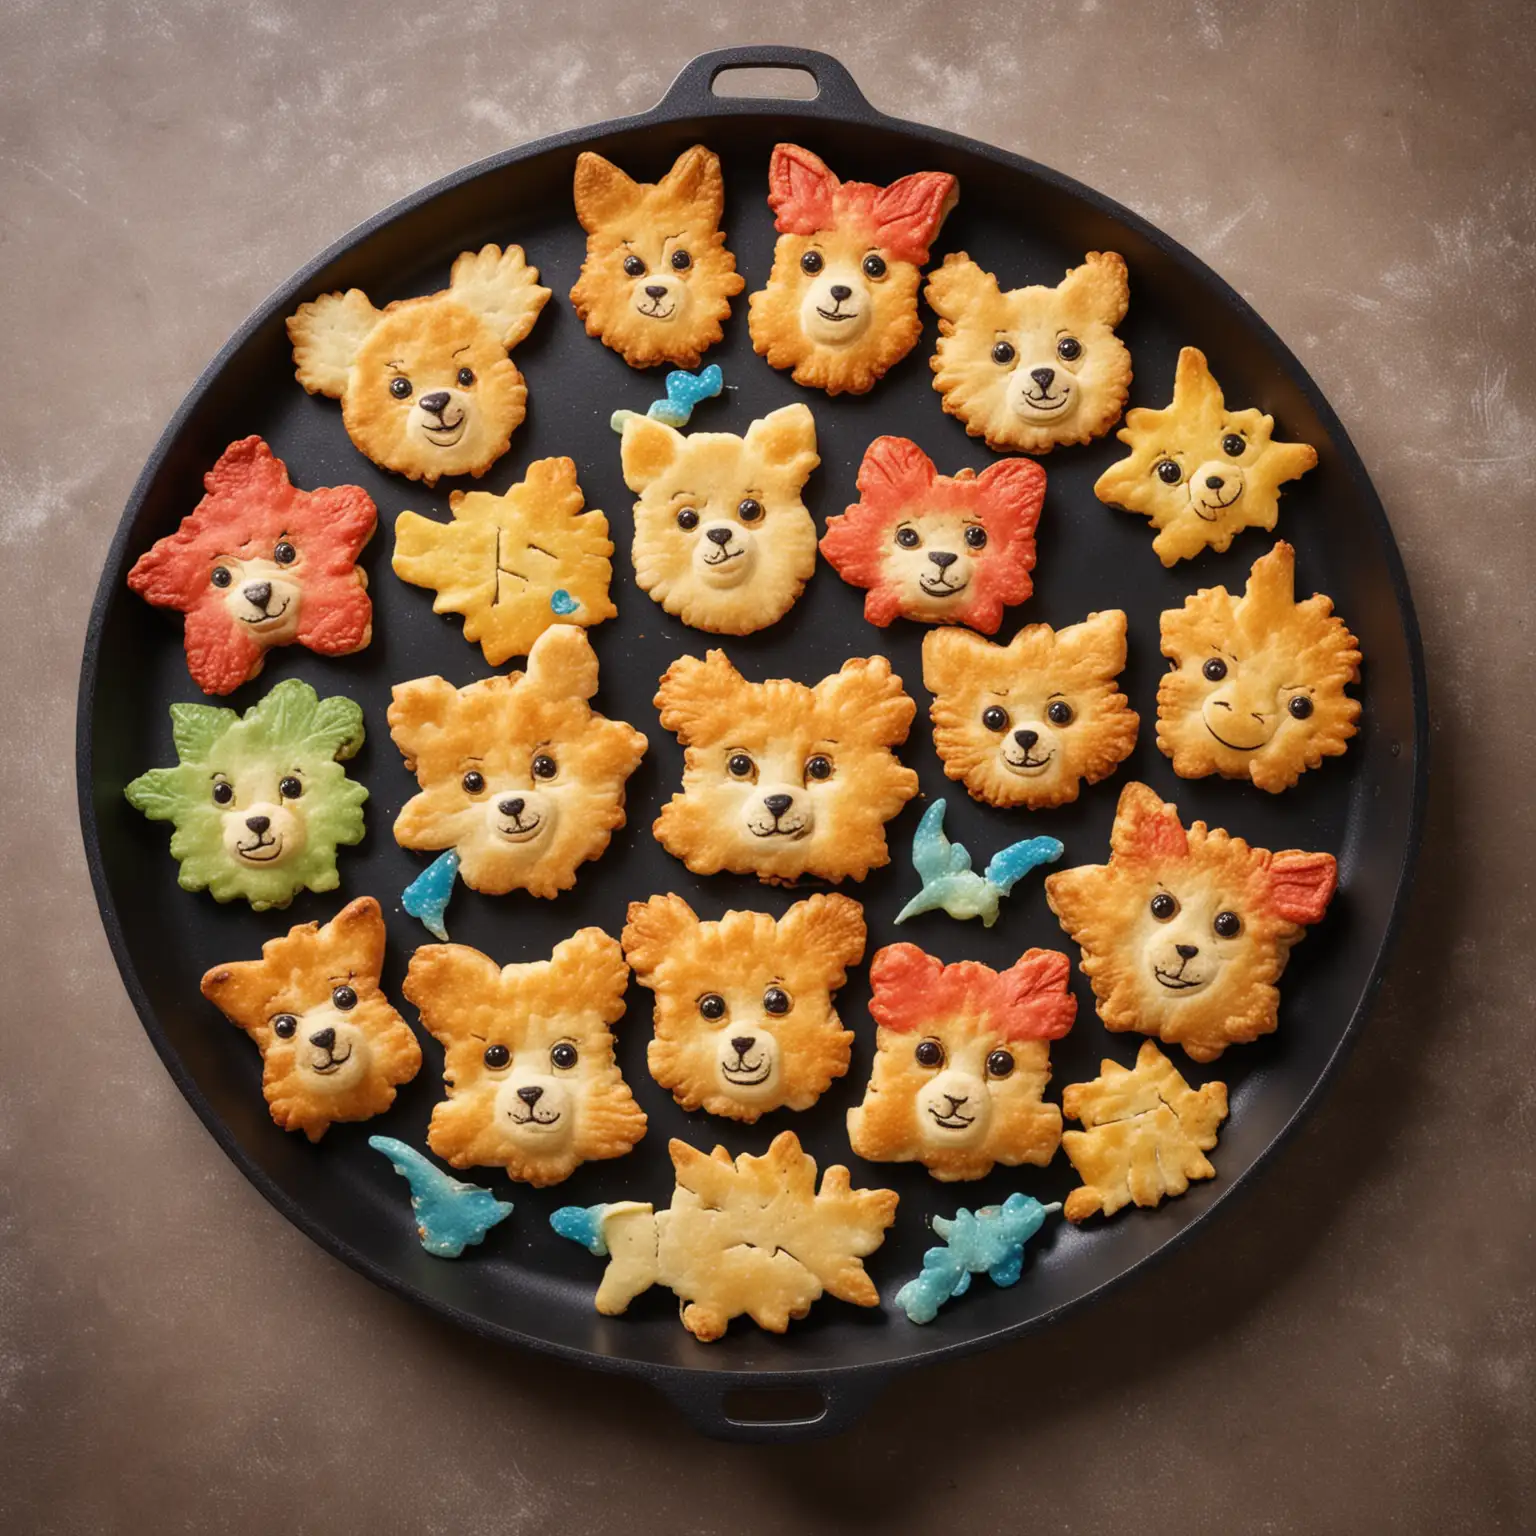 Fried crackers in various colorful animal shapes on a frying pan